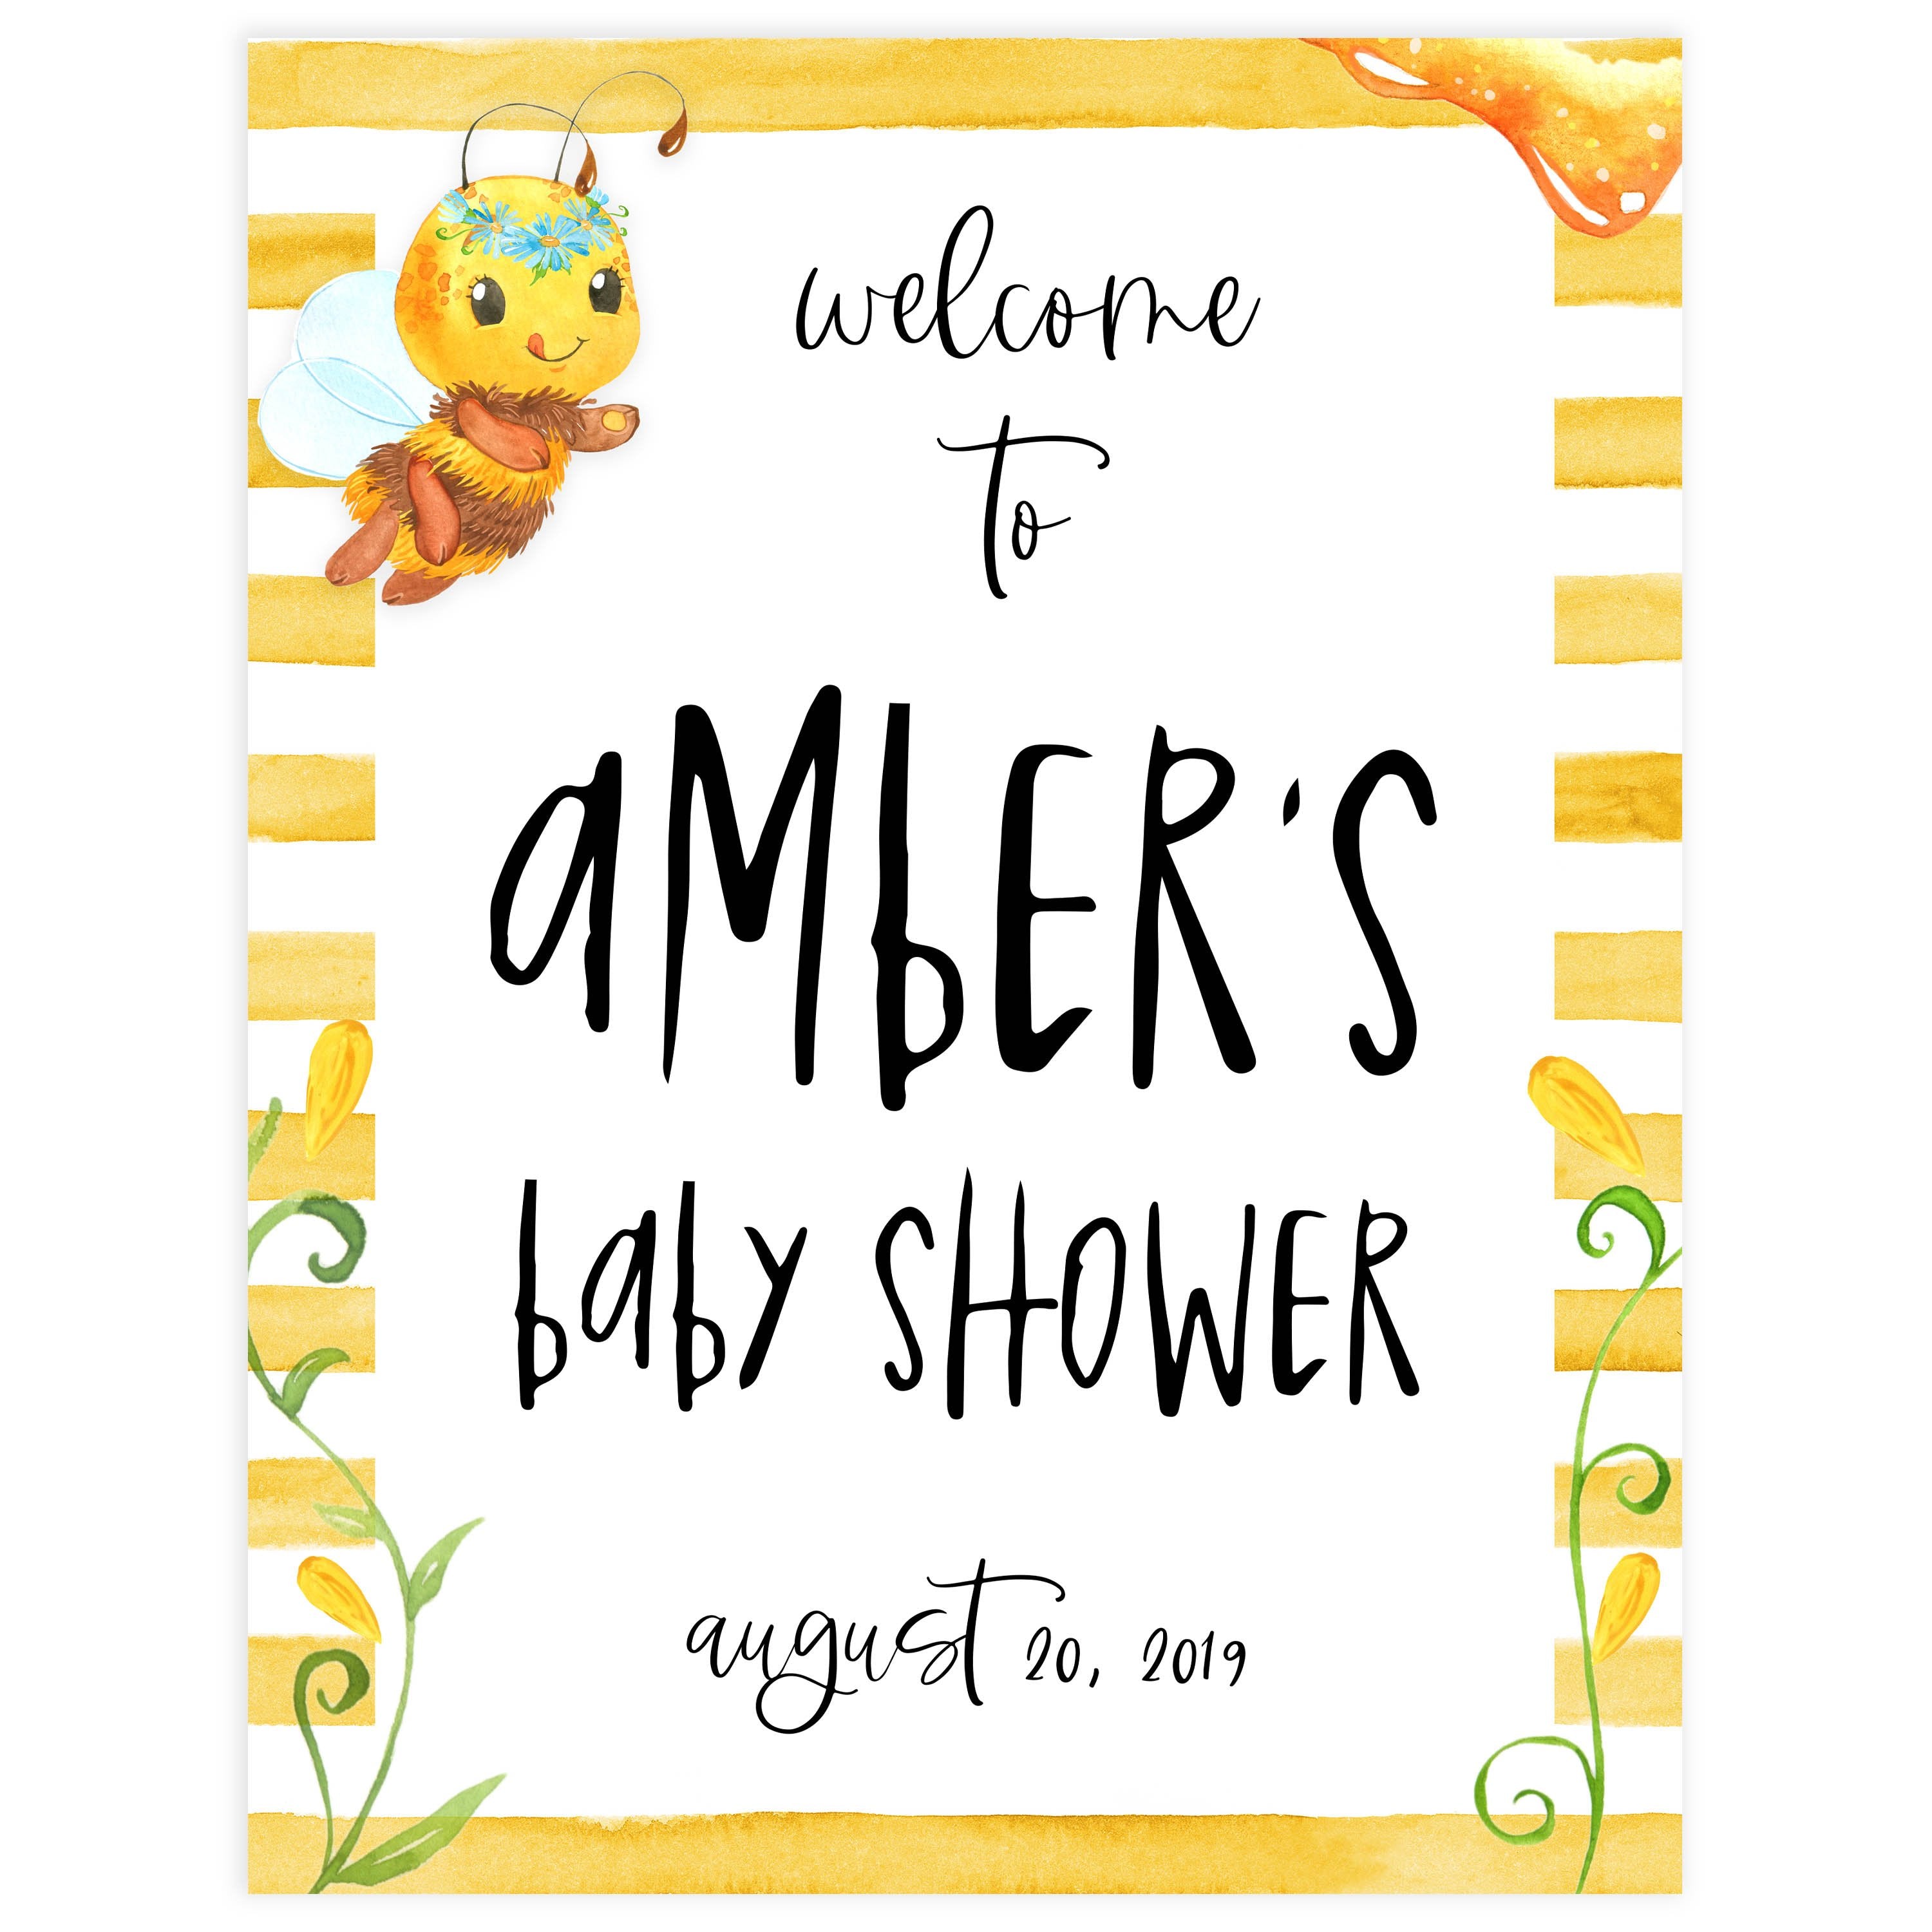 Welcome To Baby Shower Sign, Honey Bee Baby Shower Sign, Bee Baby Shower  Welcome Sign, Yellow Baby Shower Sign Decorations, Rustic Baby Shower Sign